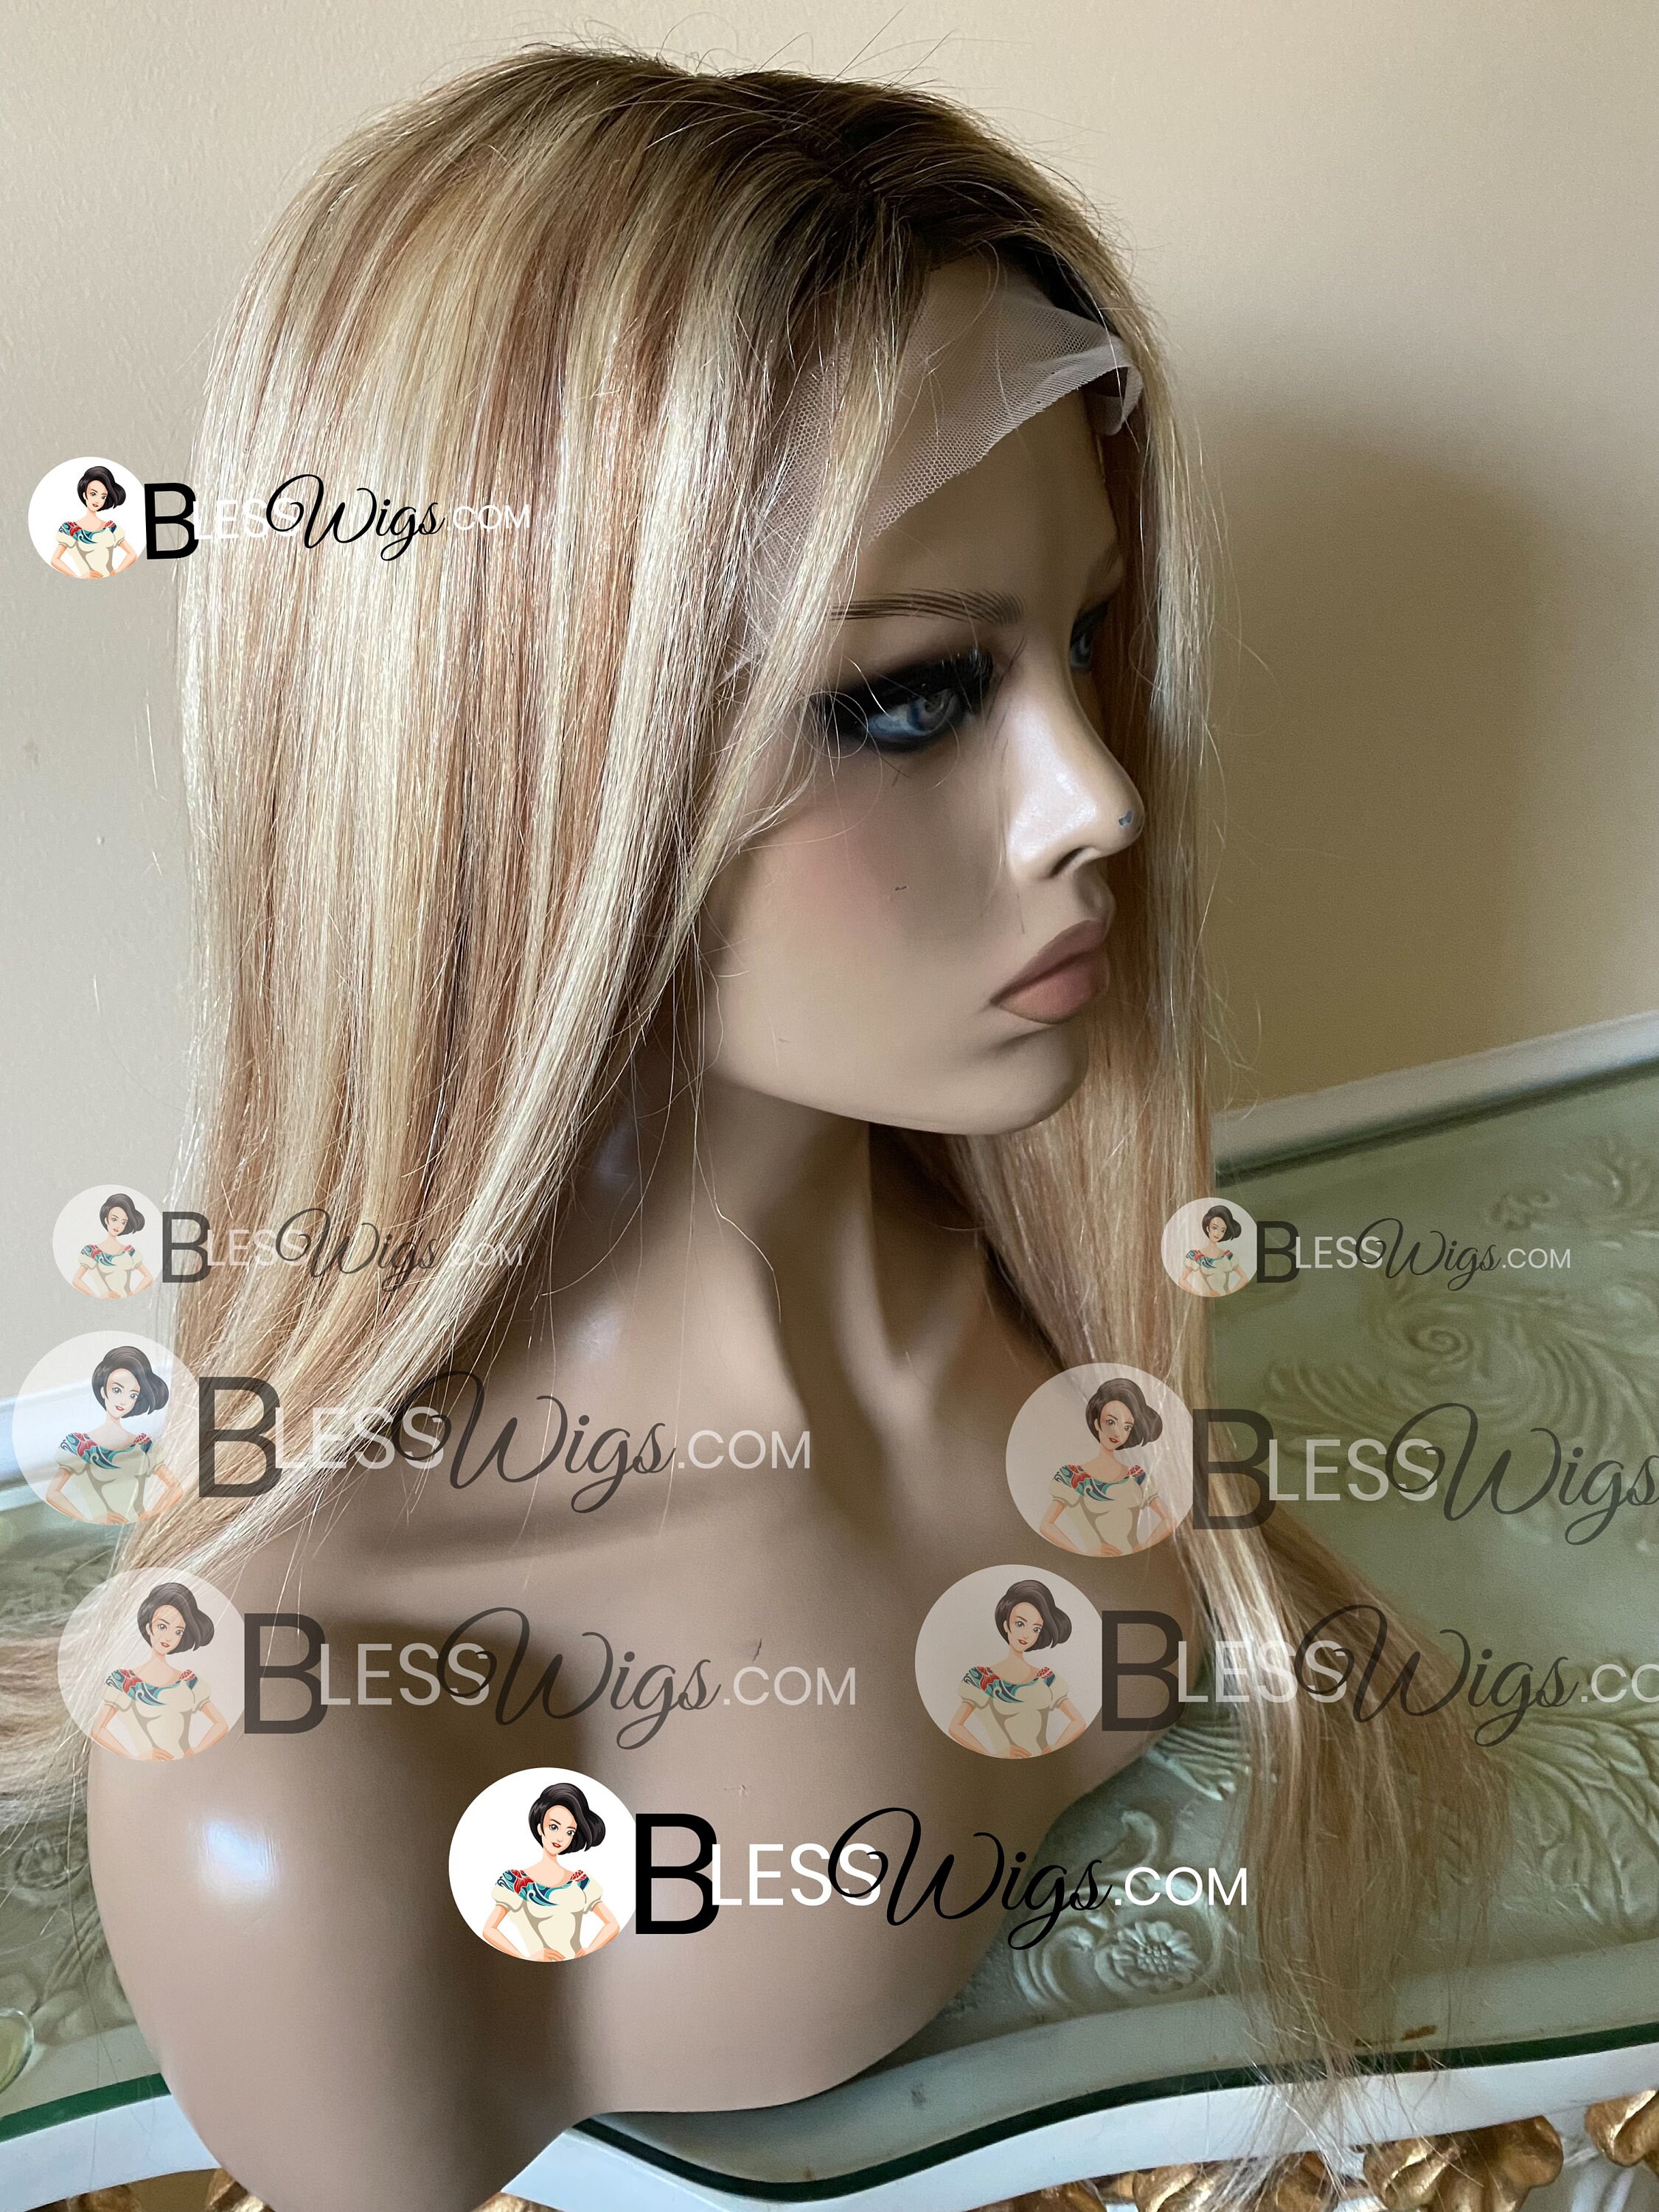 Savanna Beauty Short Heat Resistant Hair Daily Makeup Glueless Ombre Synthetic Lace Front Wigs